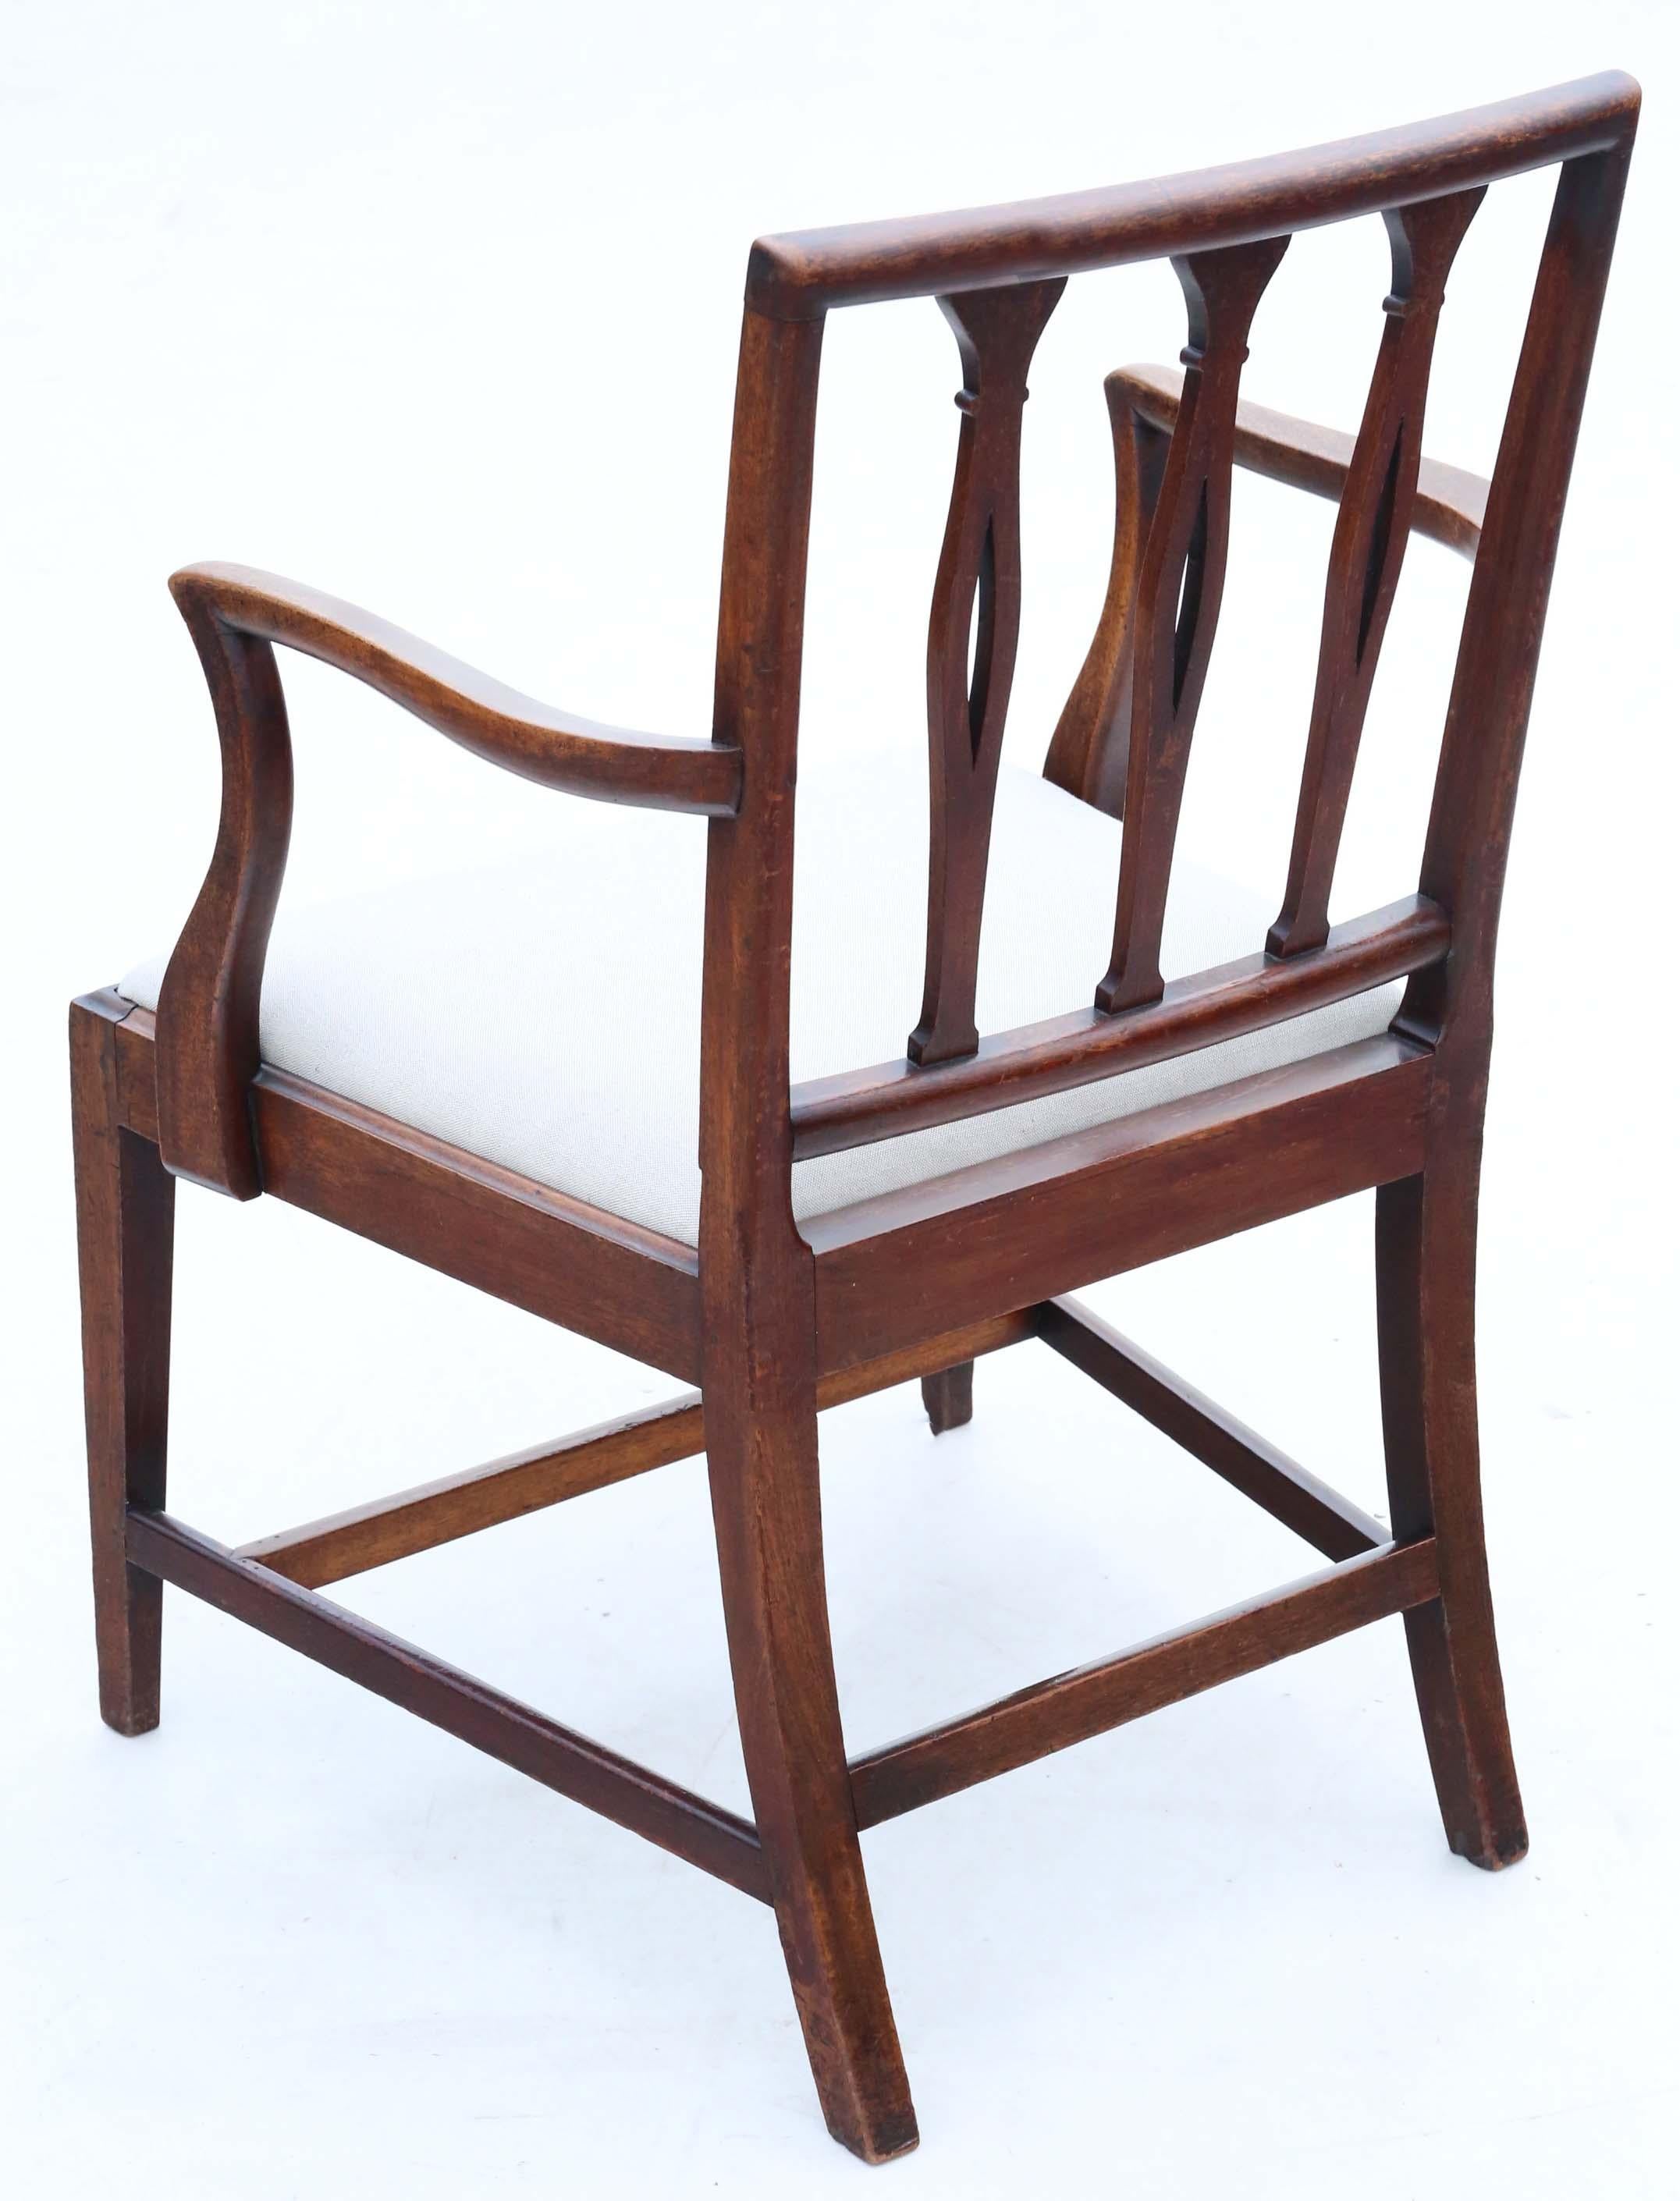 Wood 18th Century Mahogany Dining Chairs: Set of 8 (6 + 2), Antique Quality, C1820 For Sale